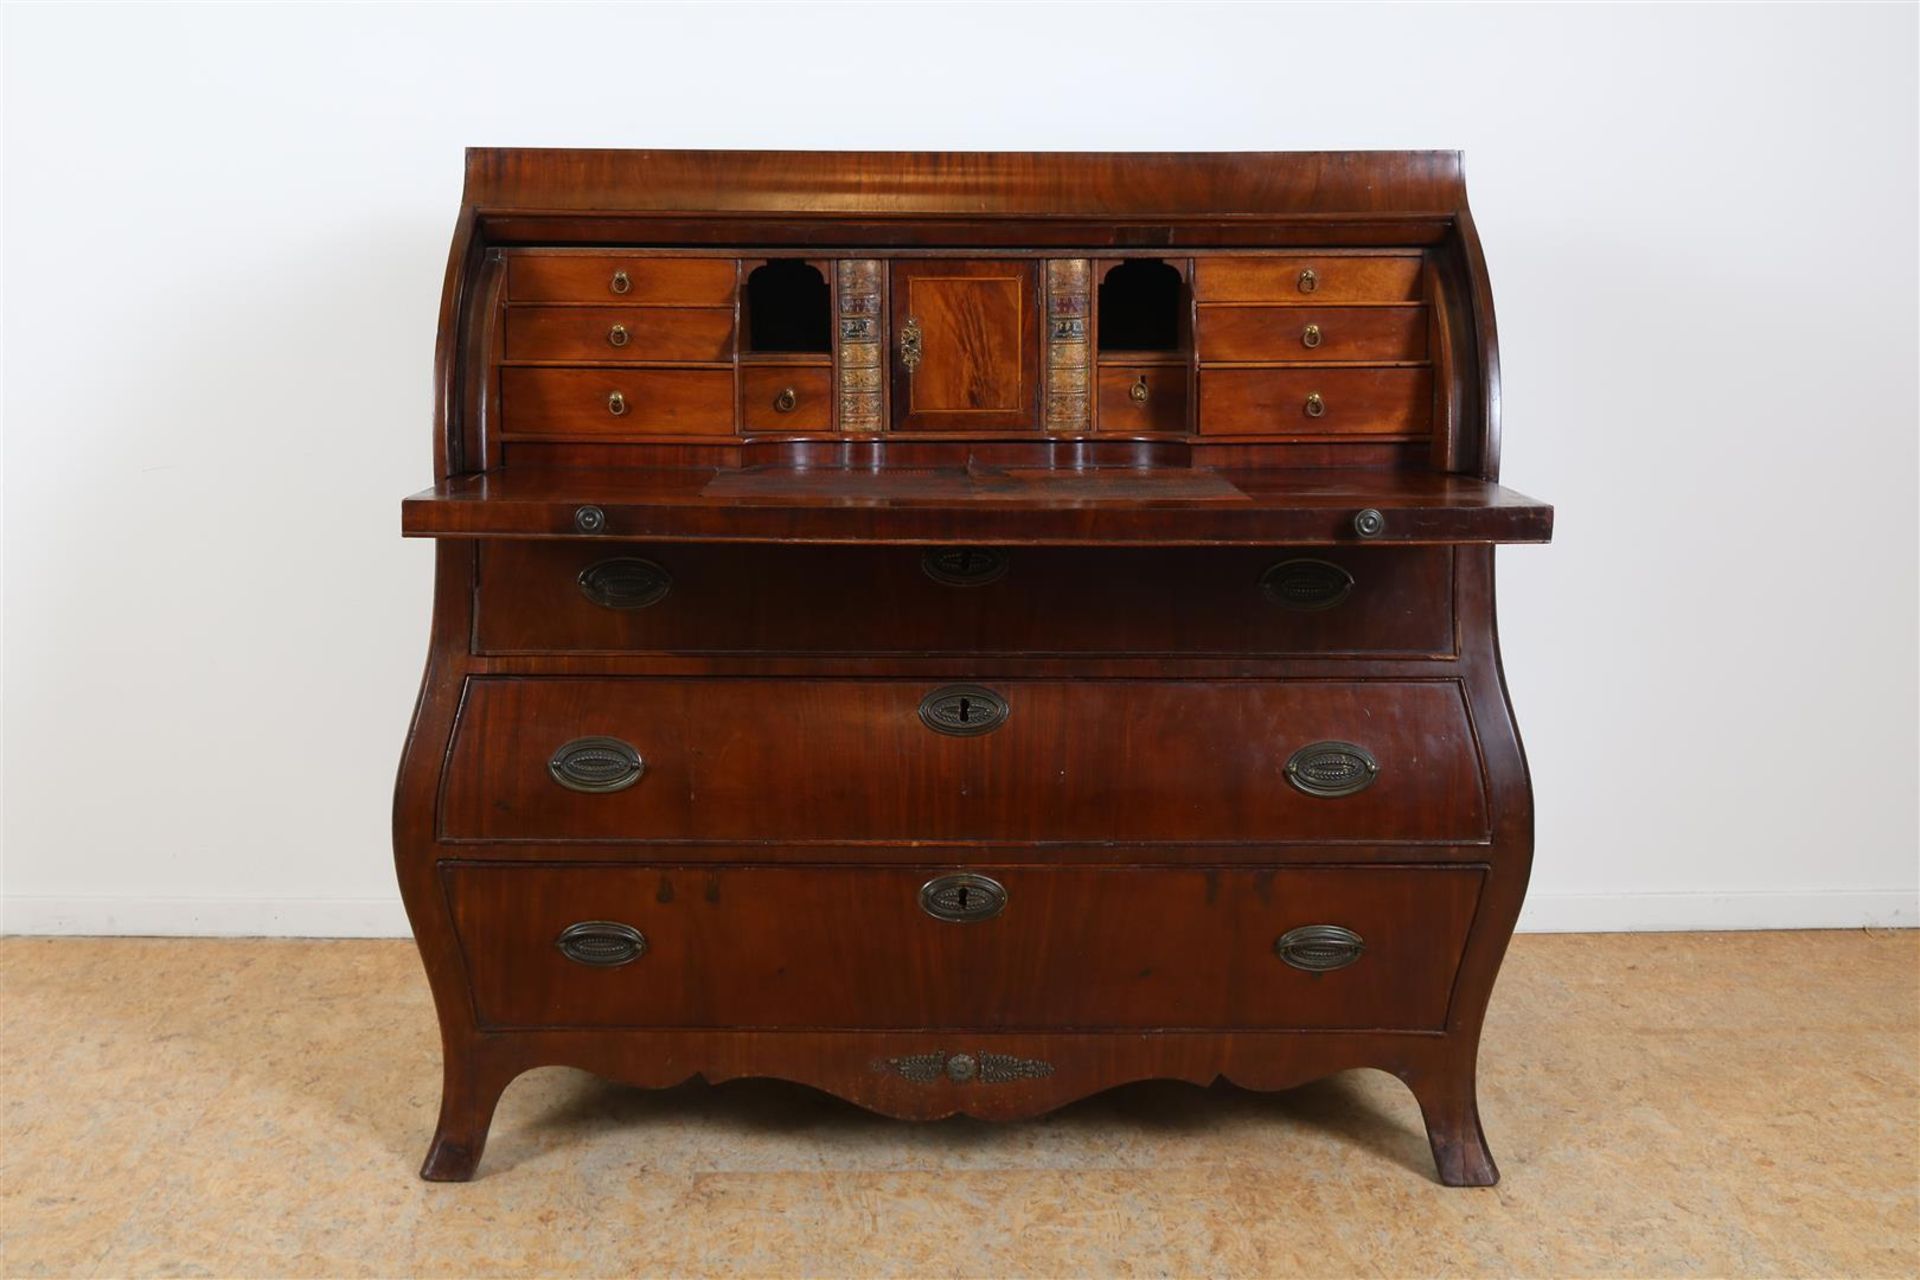 Mahogany Louis XVI roll-top desk with interior of 9 drawers, 2 hidden storage compartments behind - Image 2 of 5